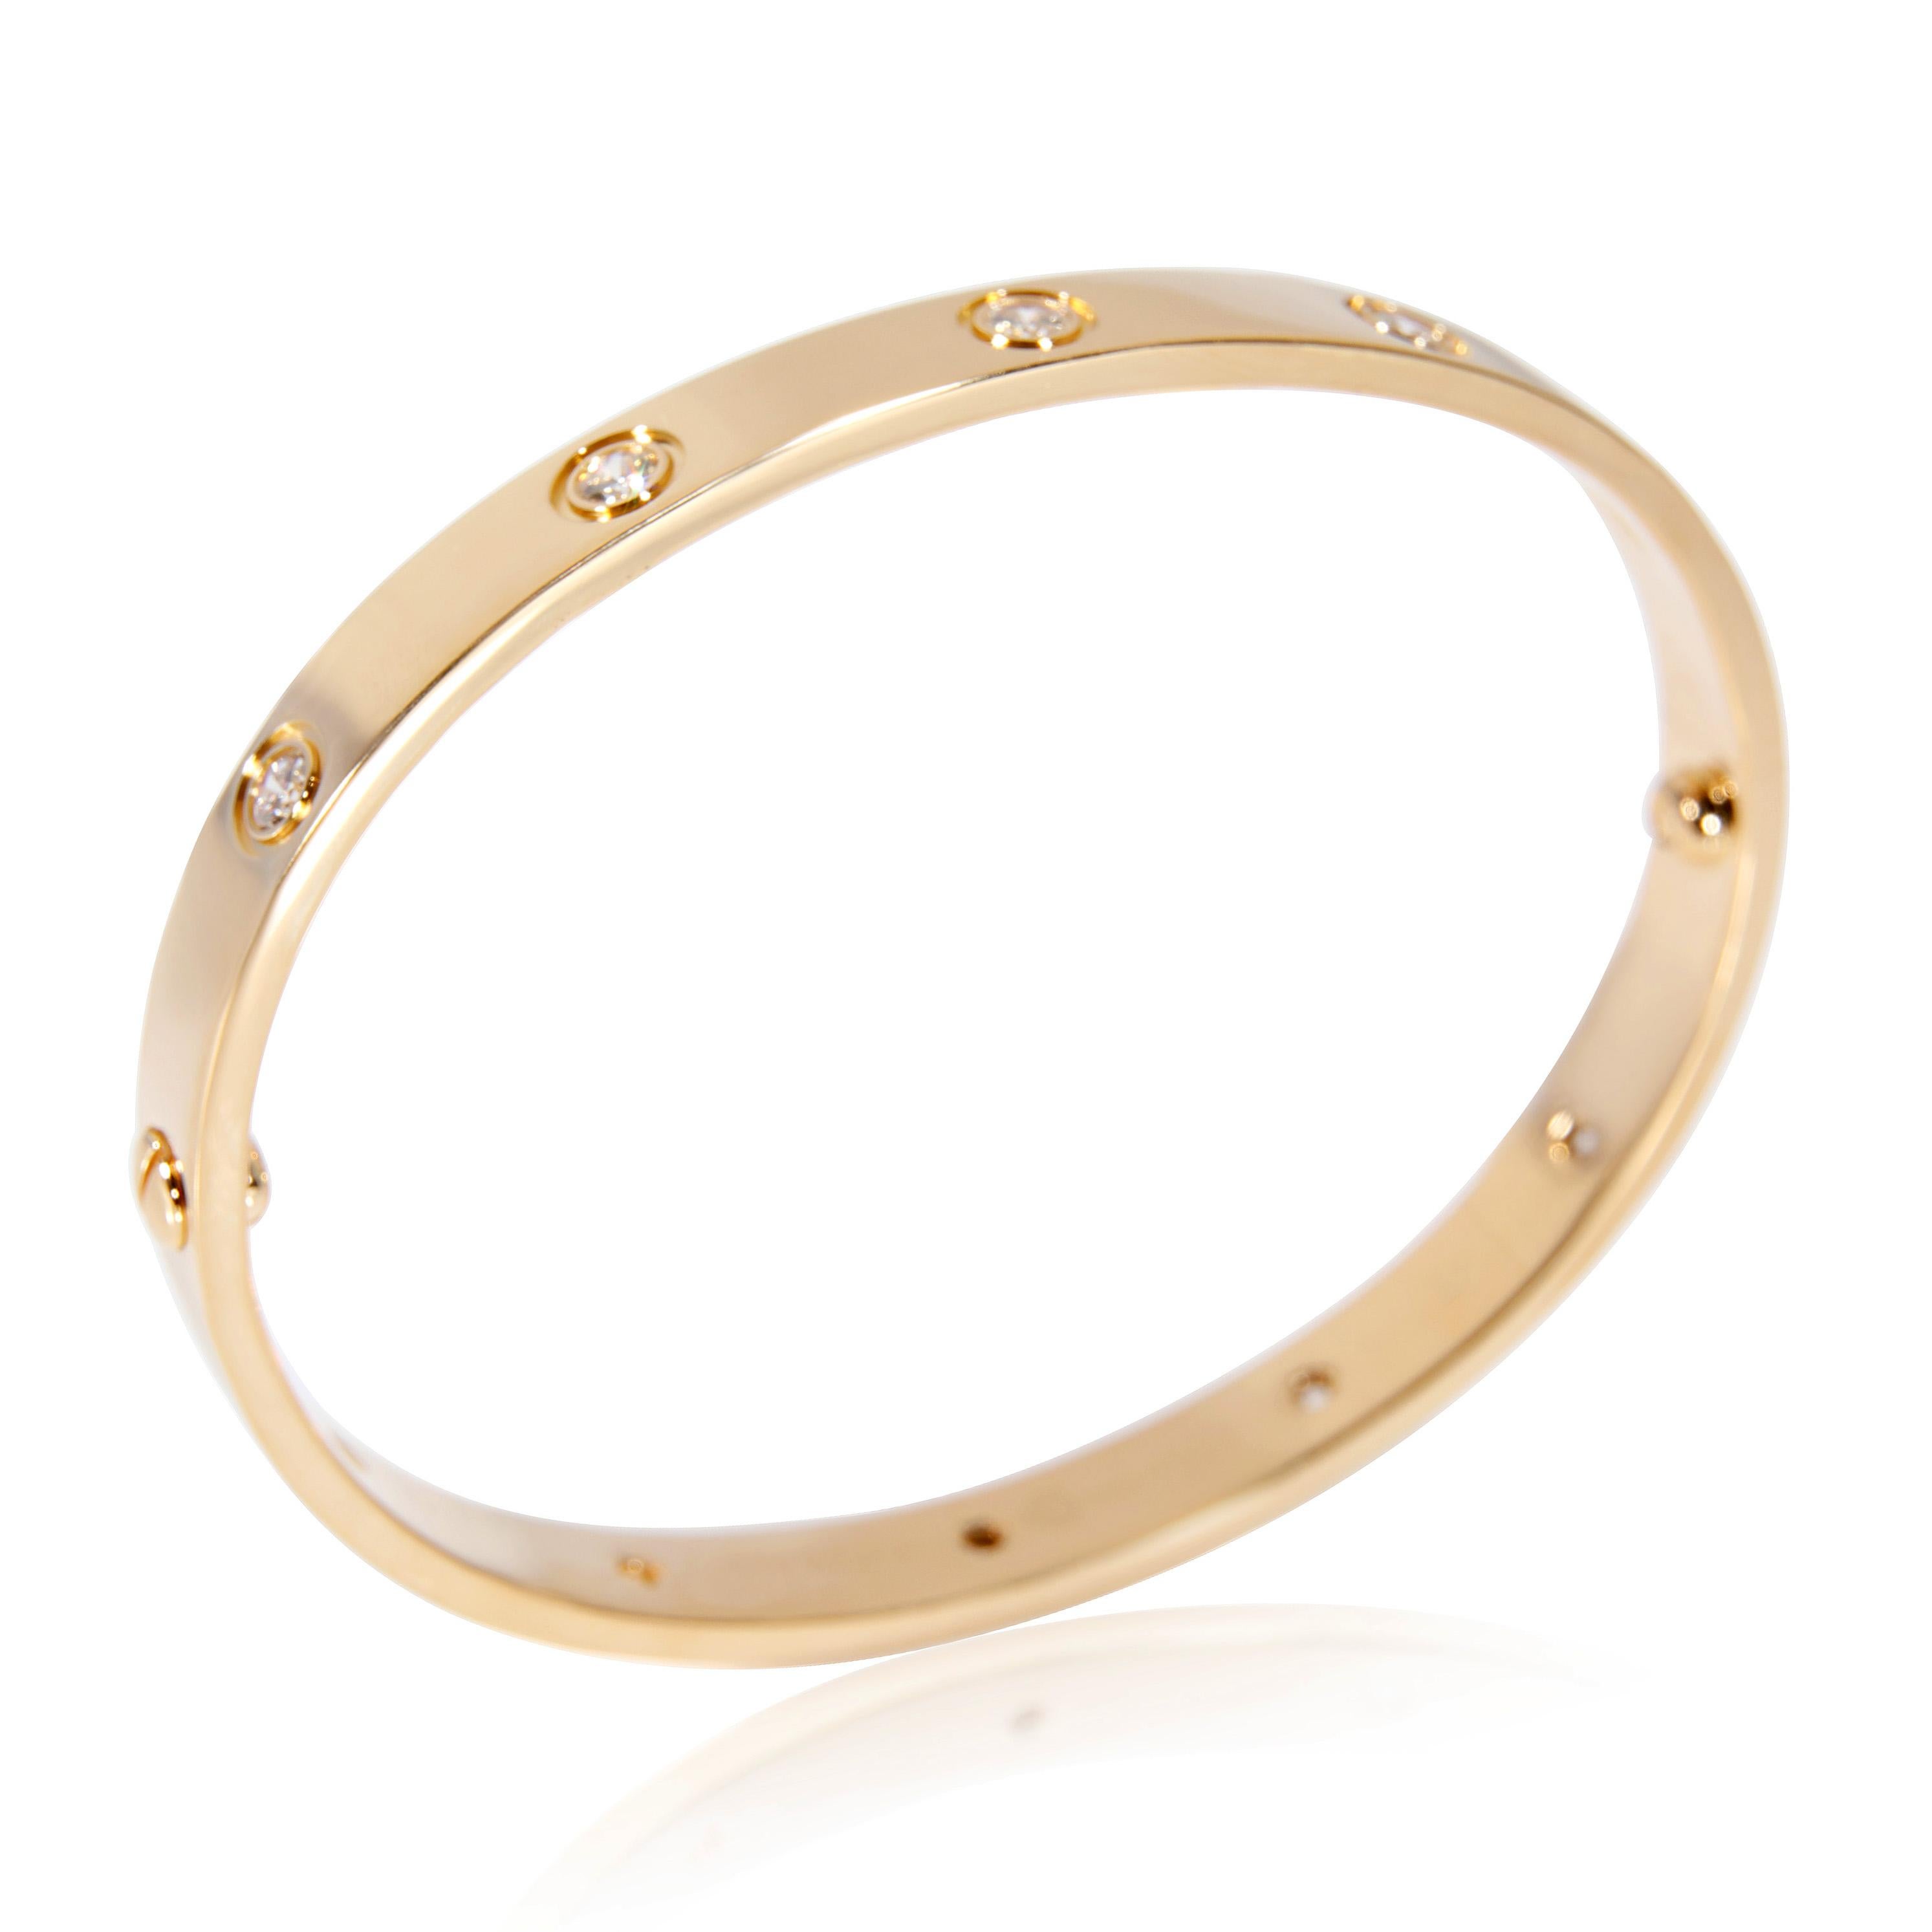 Cartier Love Bracelet with Diamonds in 18K Yellow Gold 0.96 CTW

PRIMARY DETAILS
SKU: 120727
Listing Title: Cartier Love Bracelet with Diamonds in 18K Yellow Gold 0.96 CTW
Condition Description: Retails for 16000 USD. In excellent condition and